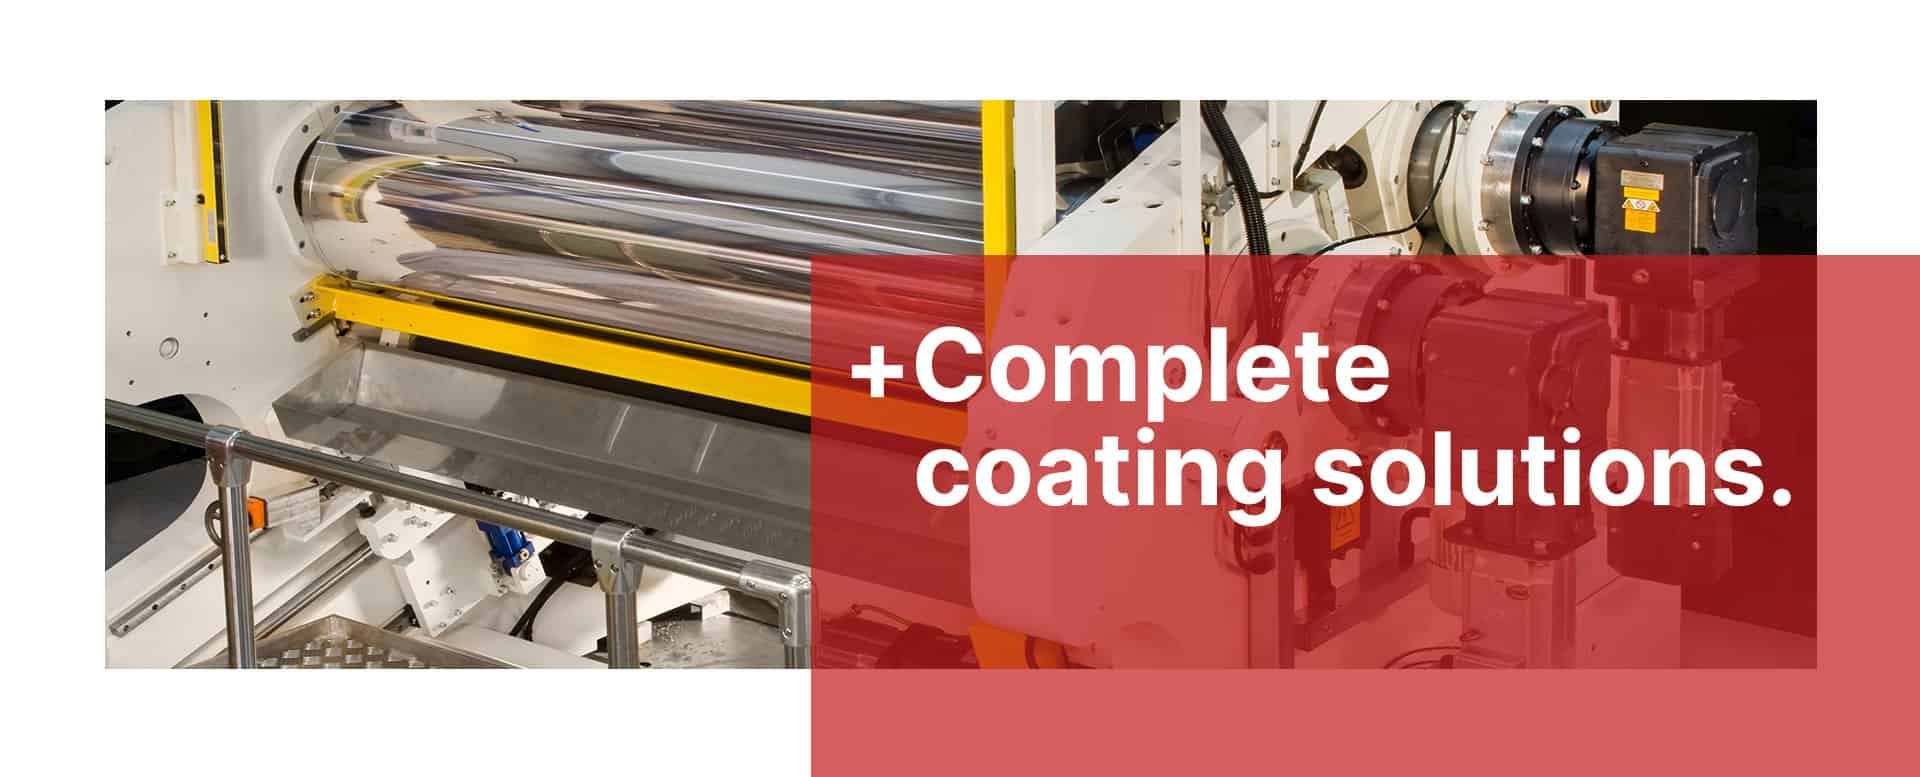 Complete Coating Solutions